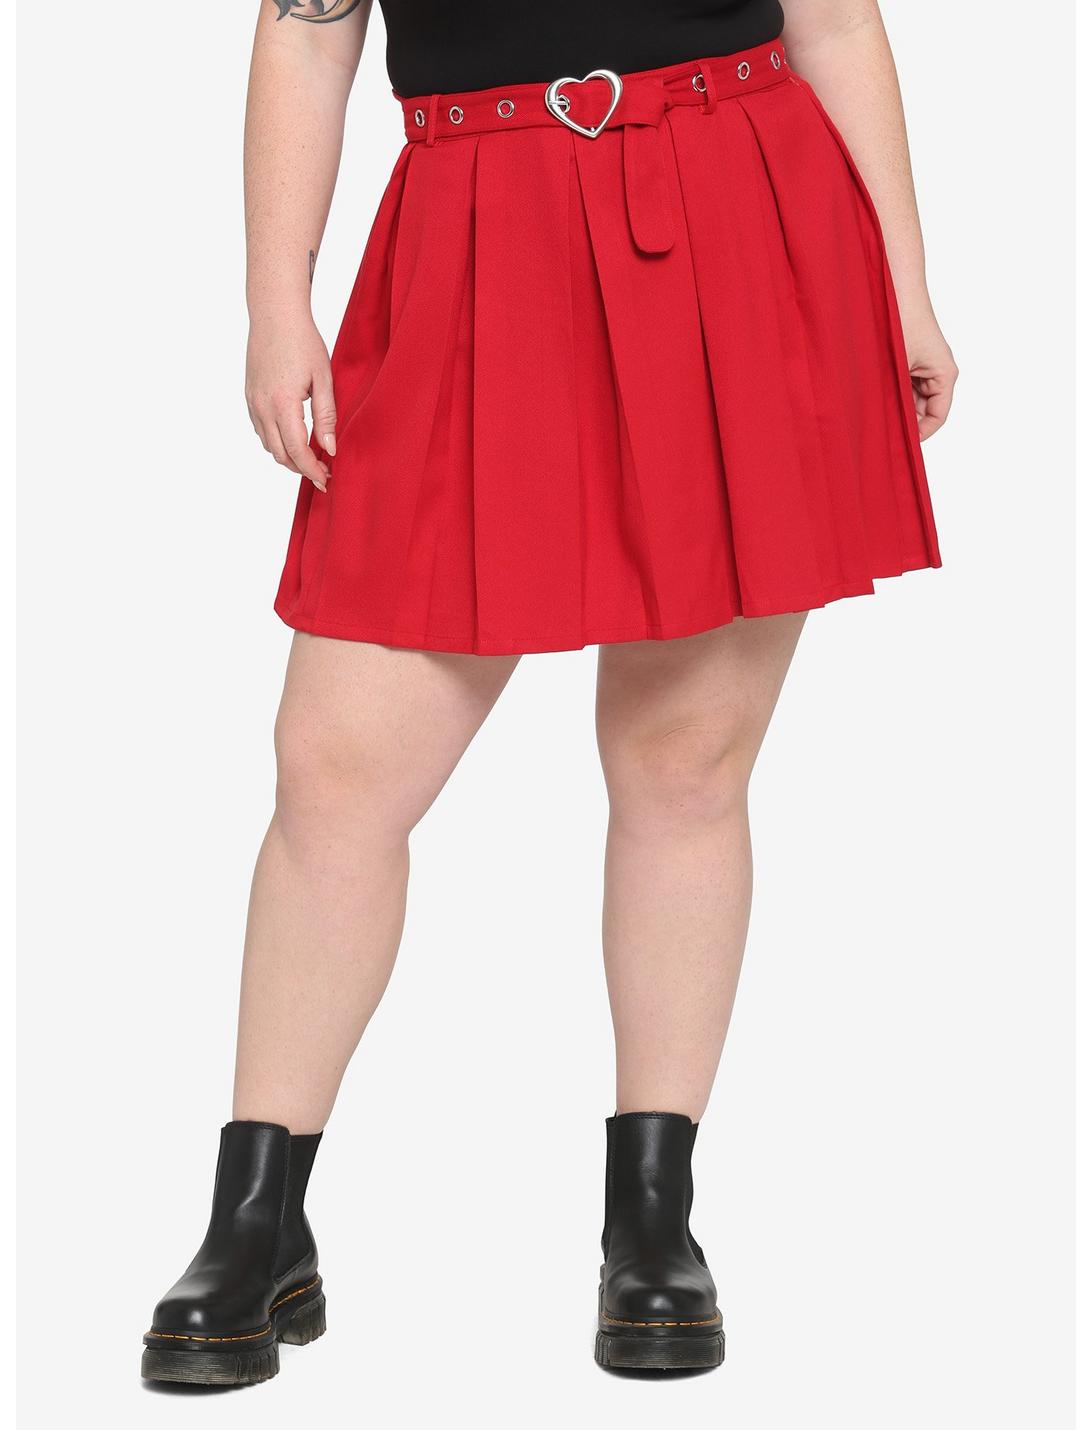 Red Heart Grommet Belt Pleated Skirt Plus Size, RED, hi-res